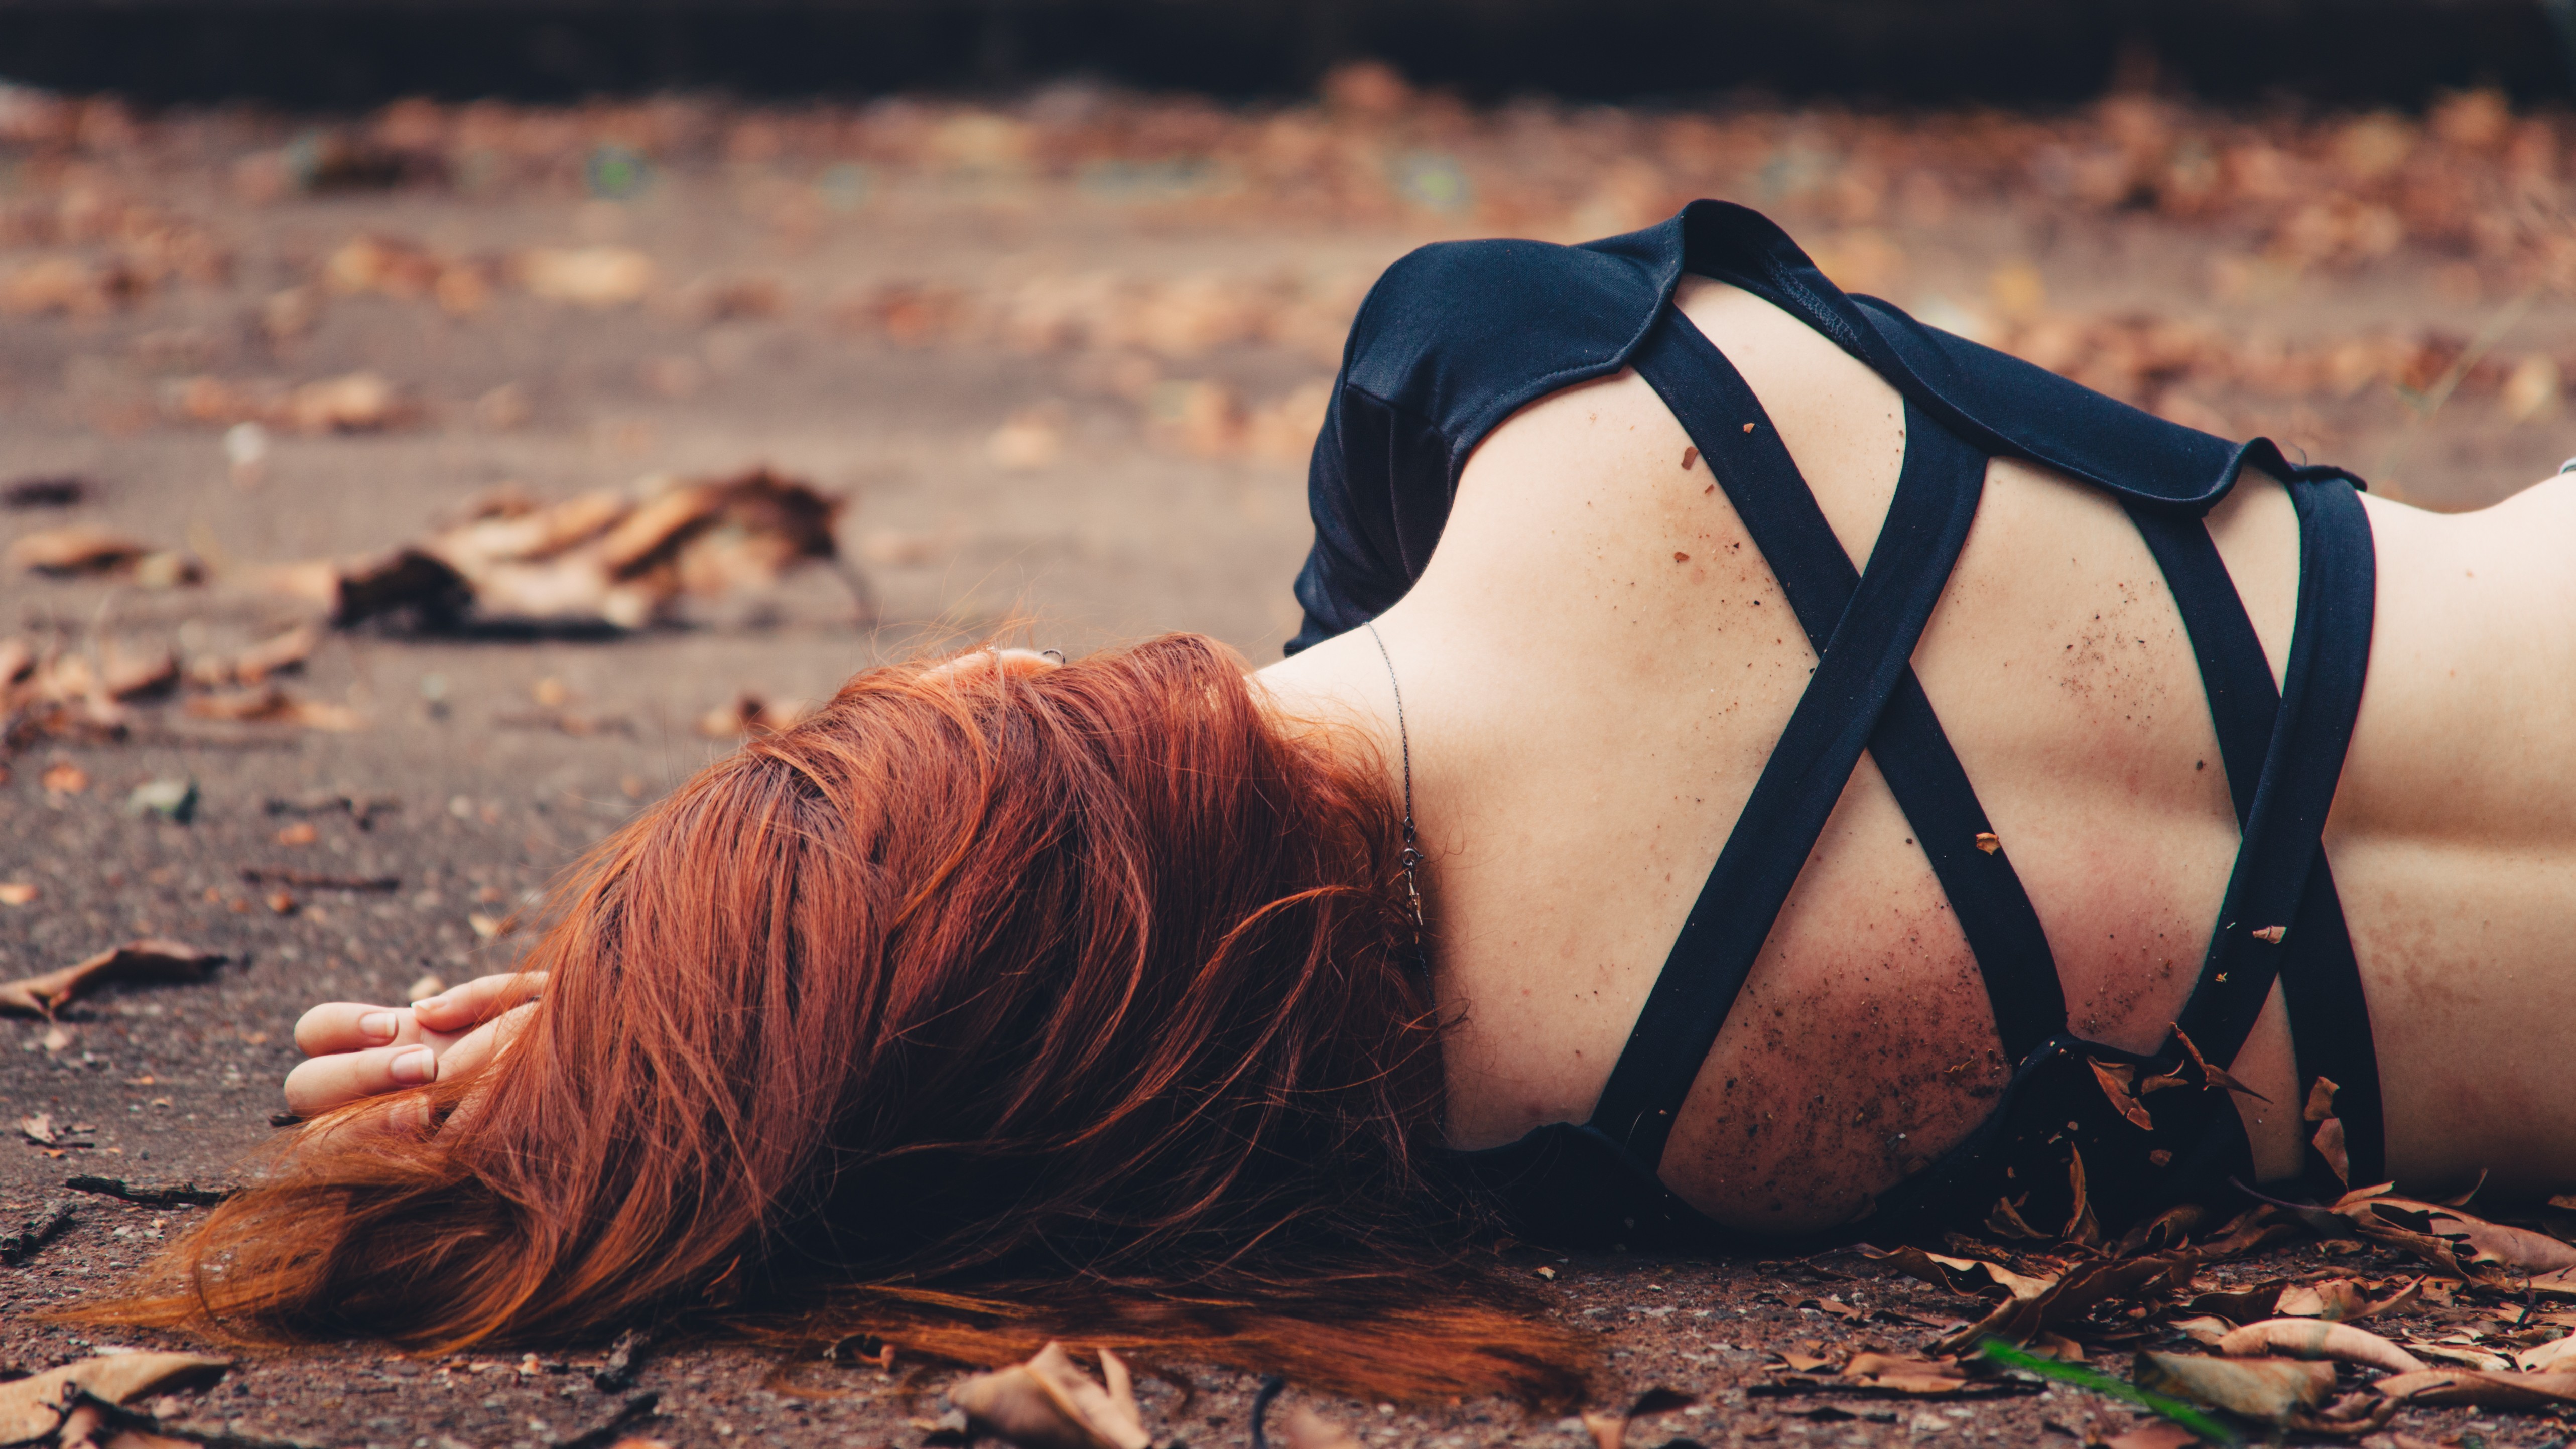 Women Model Redhead Long Hair Women Outdoors Lying Down Ground Leaves Fall Rear View Dirty Black Out 5132x2887